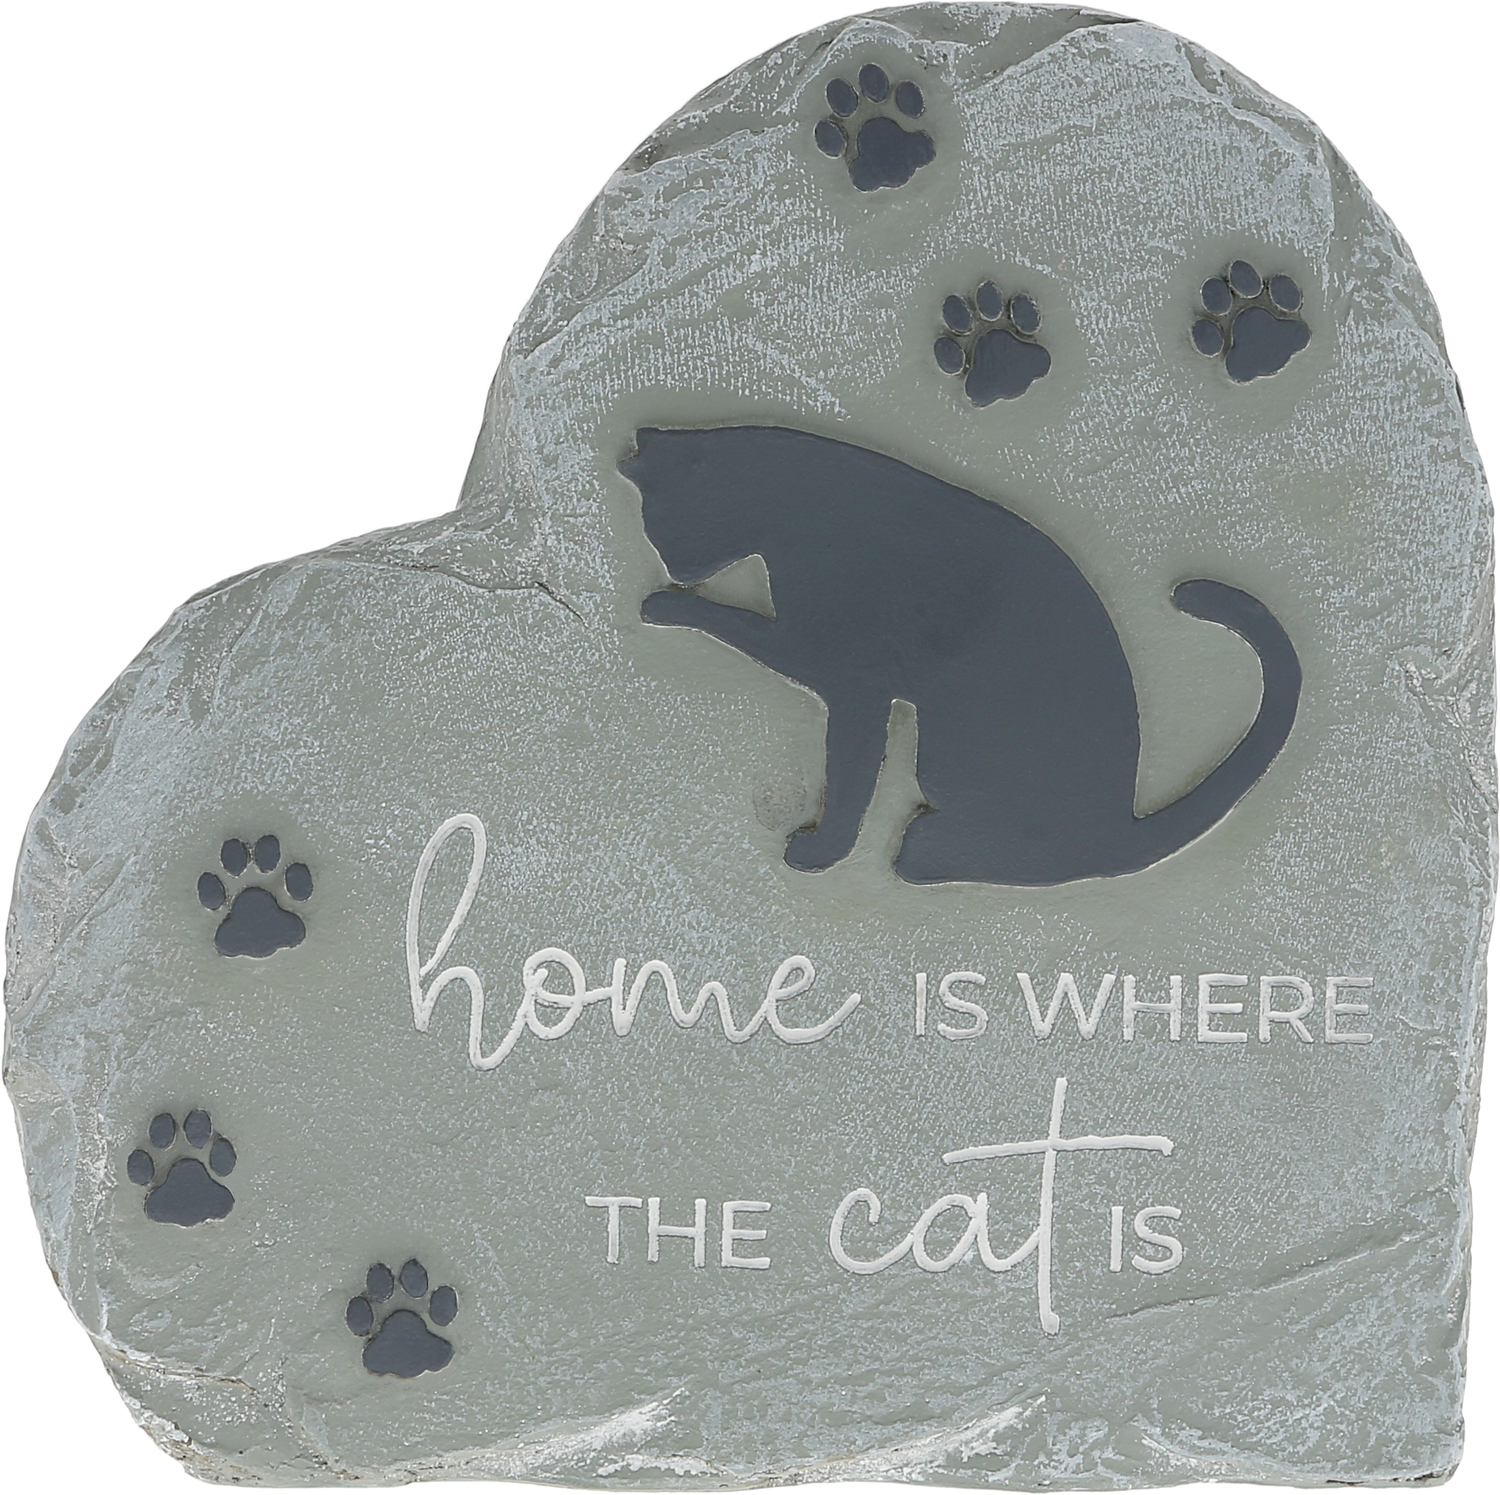 Where The Cat Is by Furever Pawsome - Where The Cat Is - 6" Garden Stone